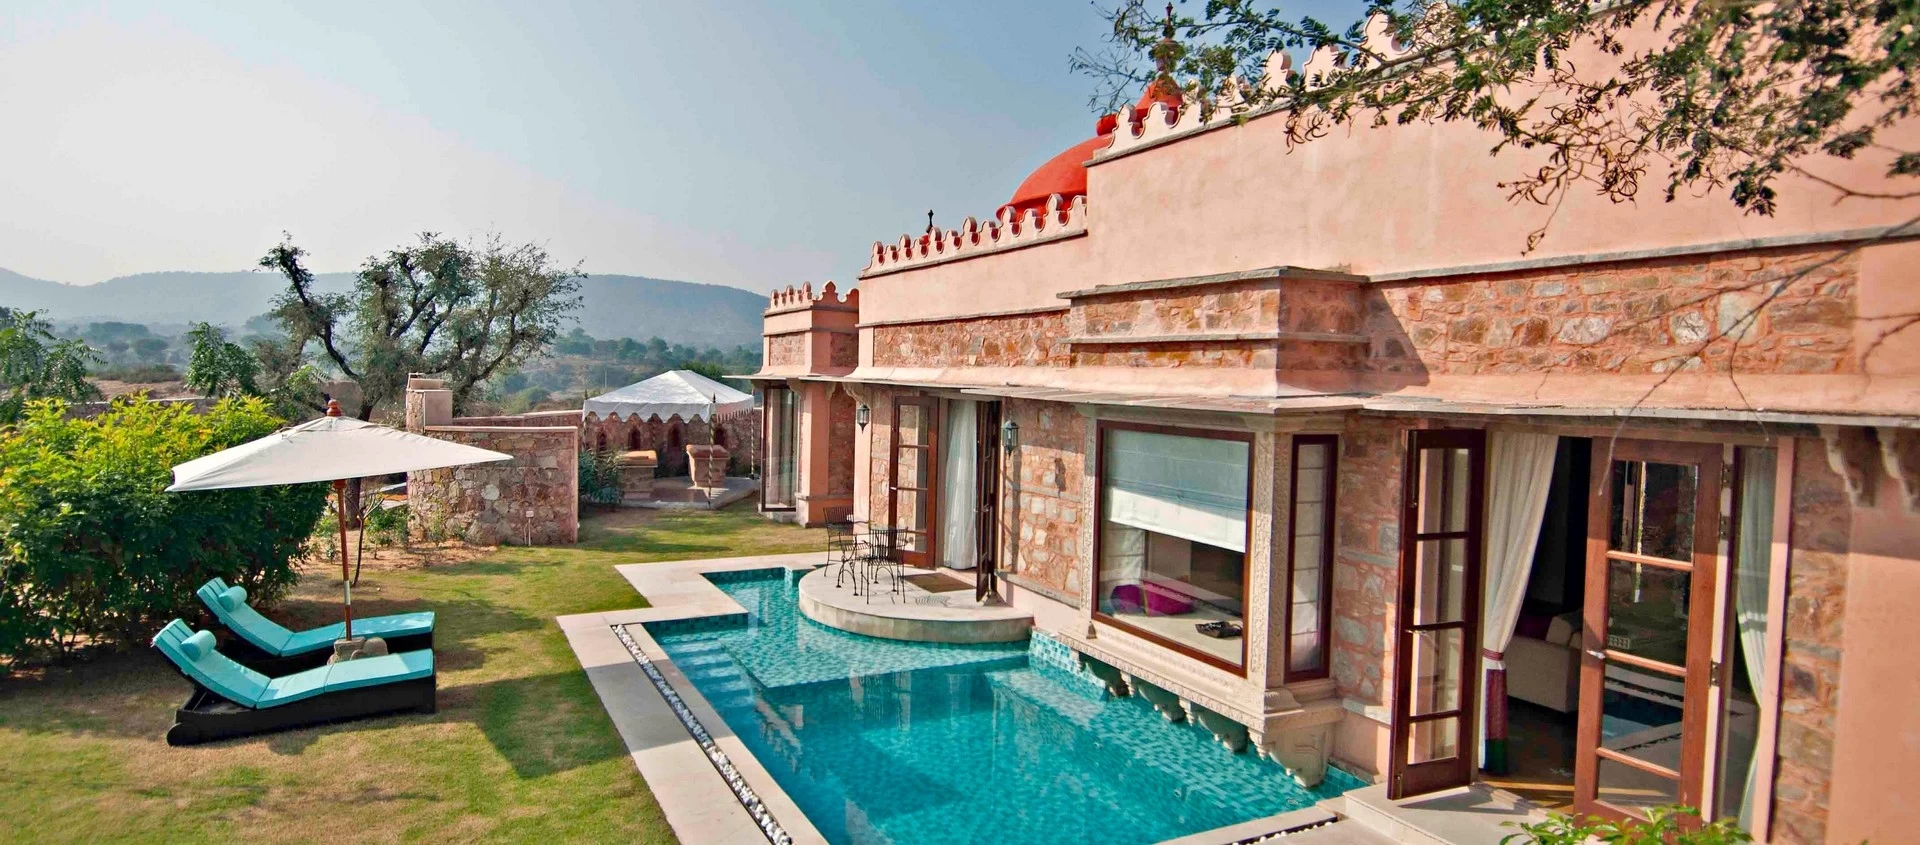 25 Best Pet Friendly Hotels in India